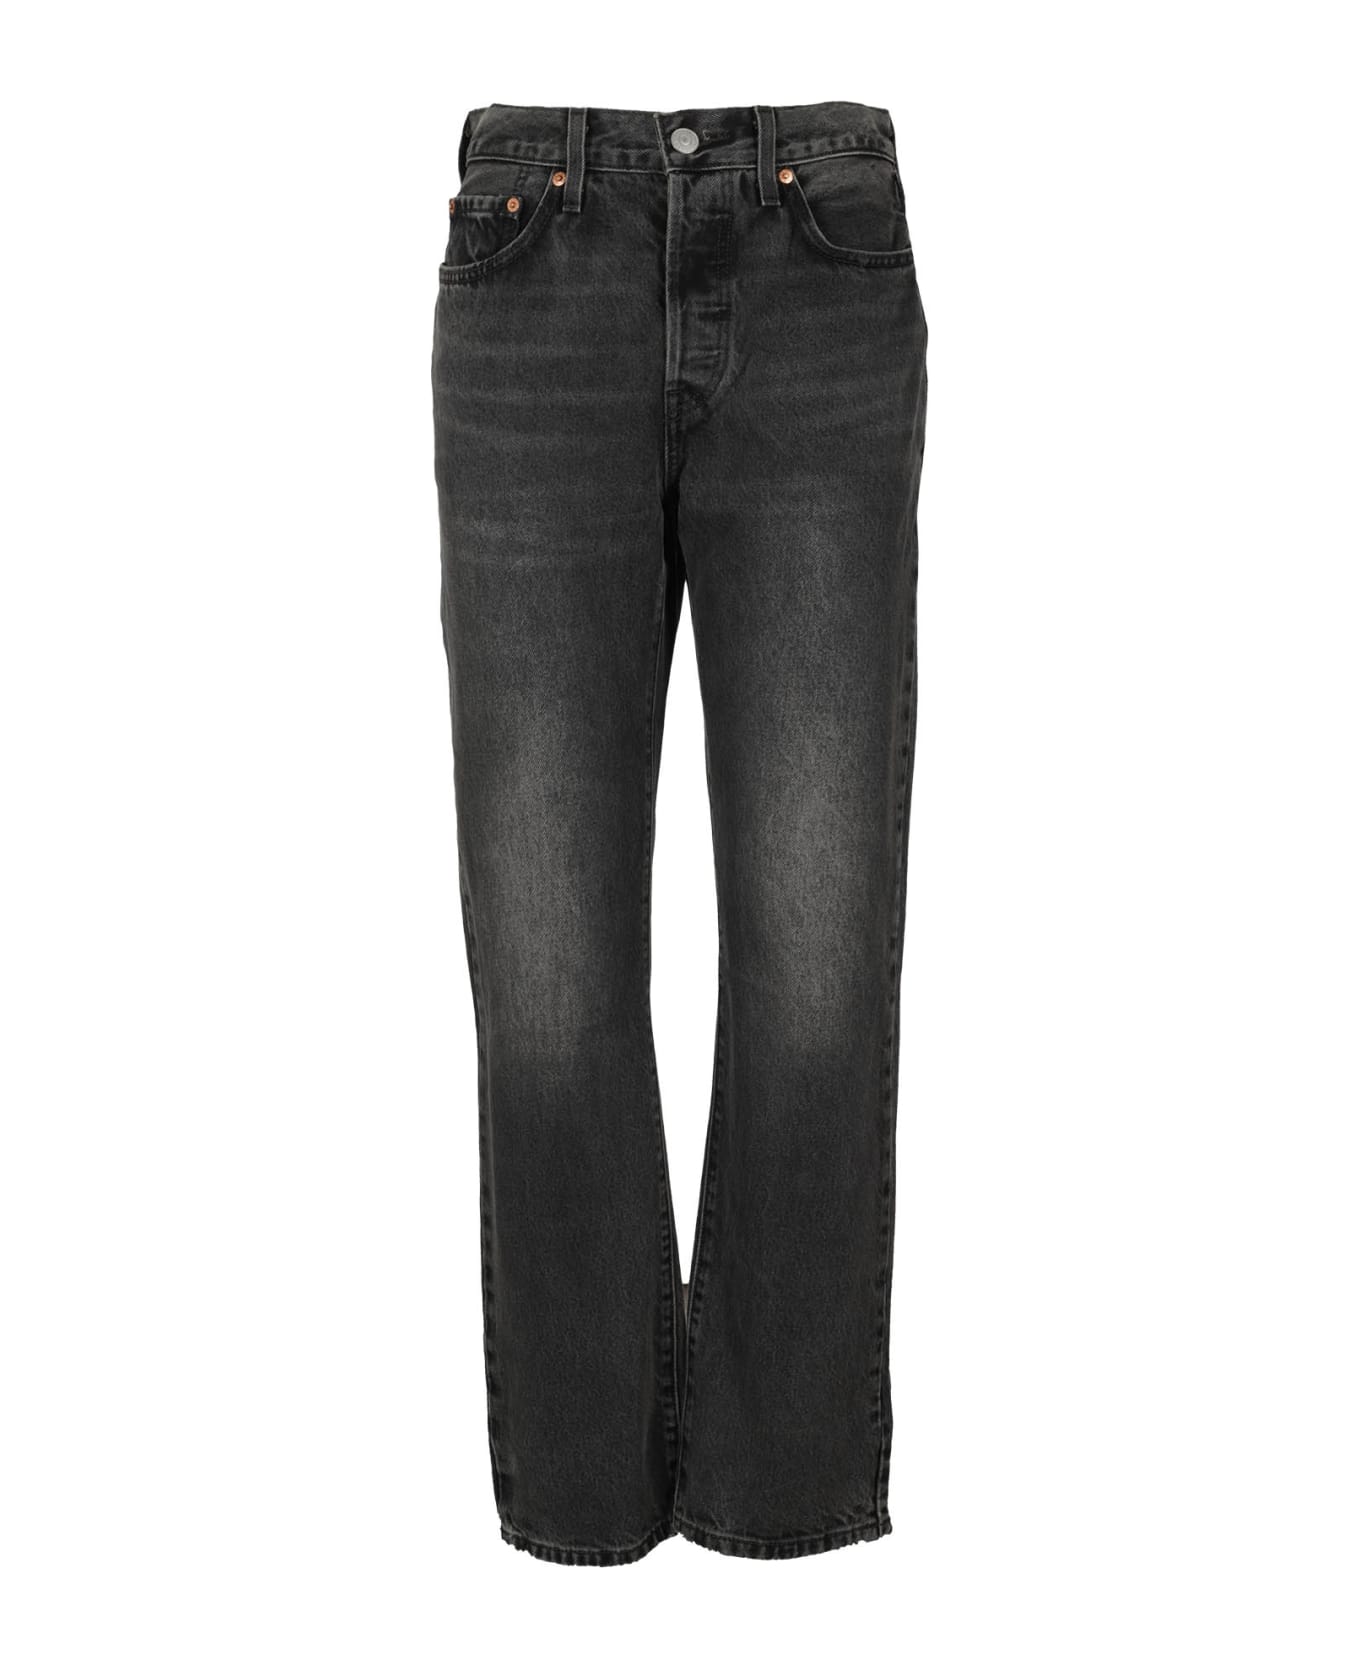 Levi's 501 Jeans For Women Take A Hint - Black デニム